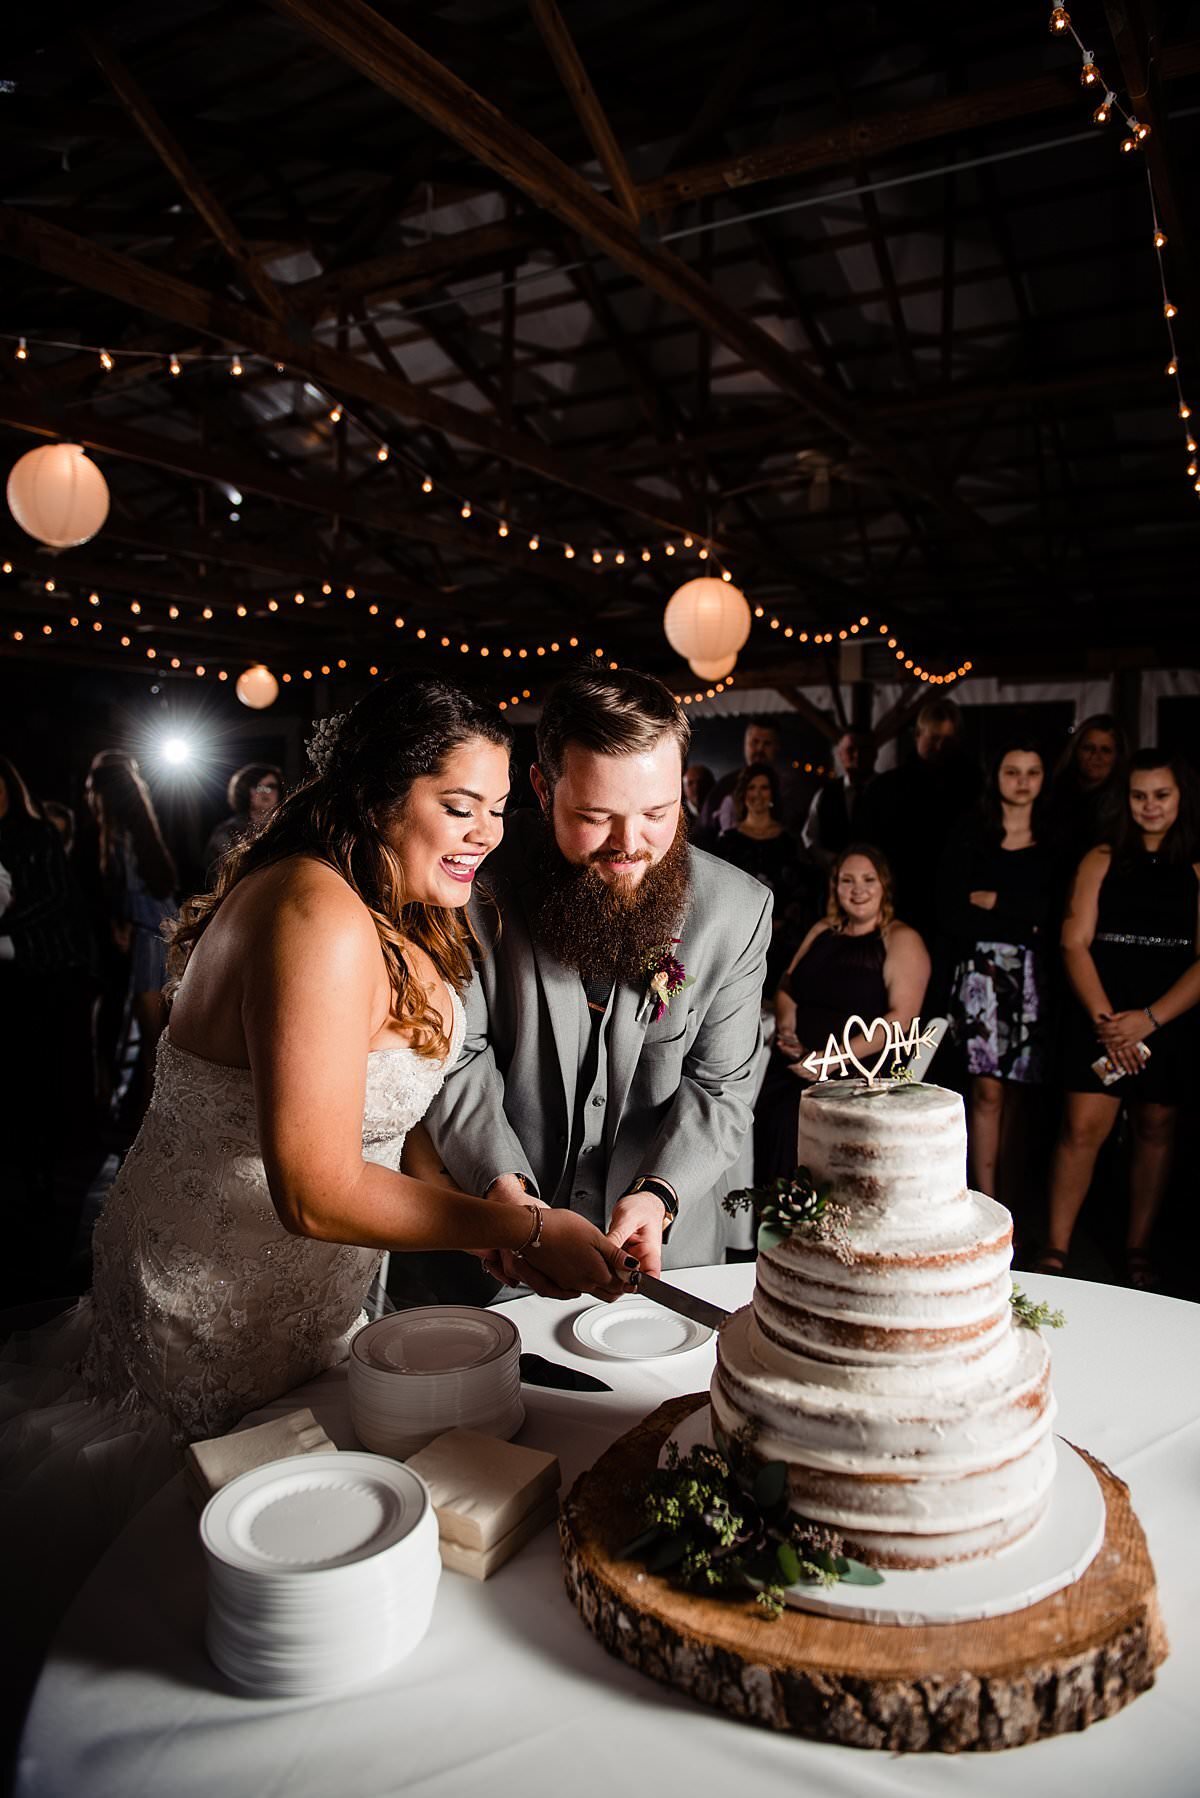 Bride and groom cutting nearly-naked cake